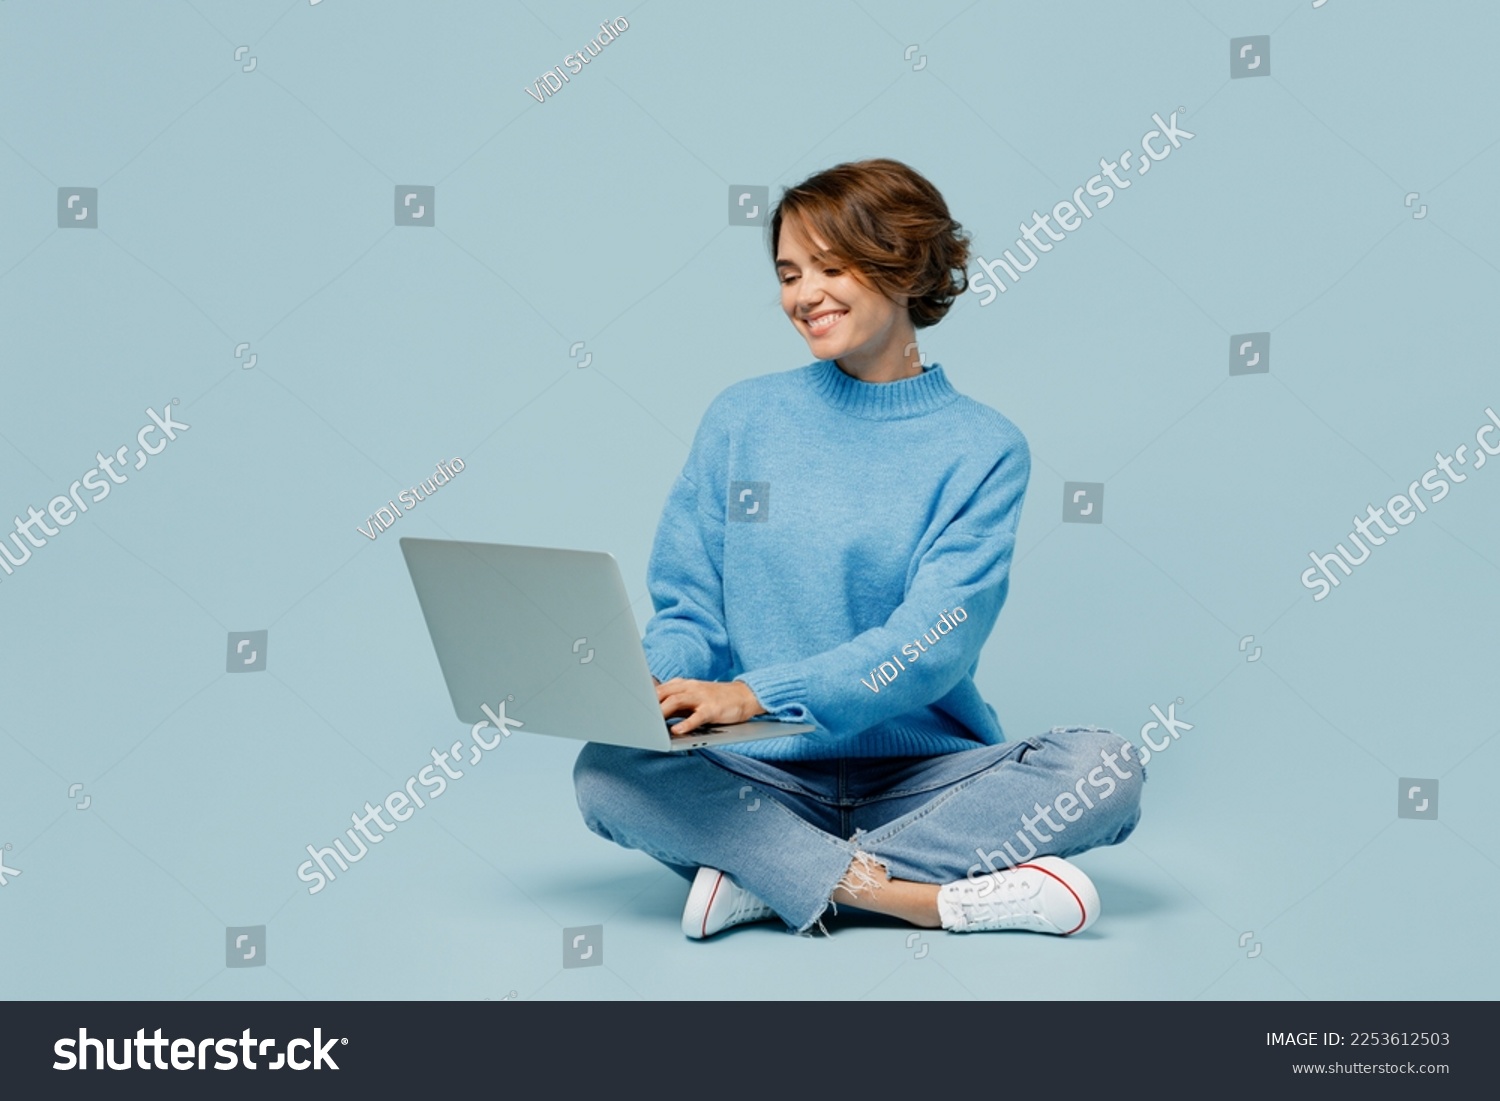 Full body young smiling happy fun cool IT woman wear knitted sweater hold use work on laptop pc computer isolated on plain pastel light blue cyan background studio portrait. People lifestyle concept #2253612503